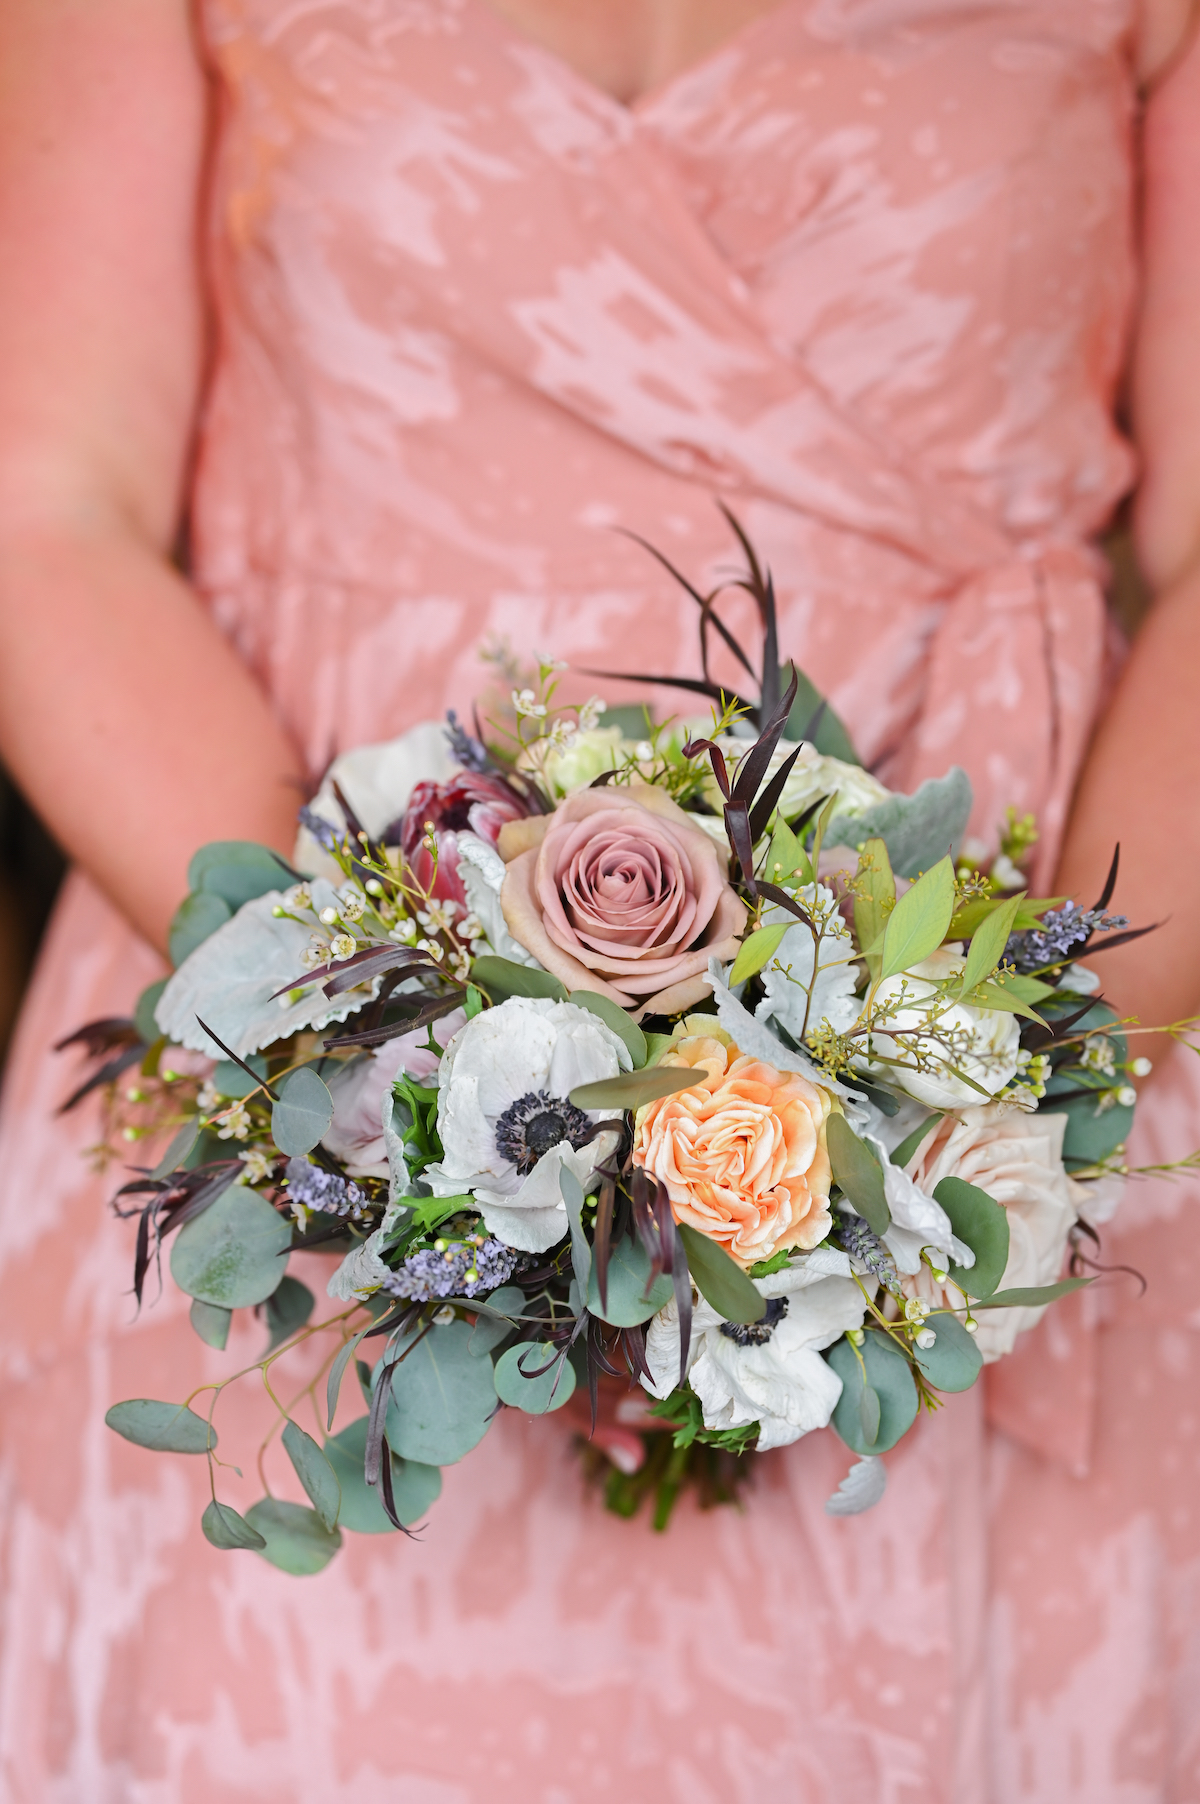 Bridesmaid bouquet with blush roses, anemone, and eucalyptus